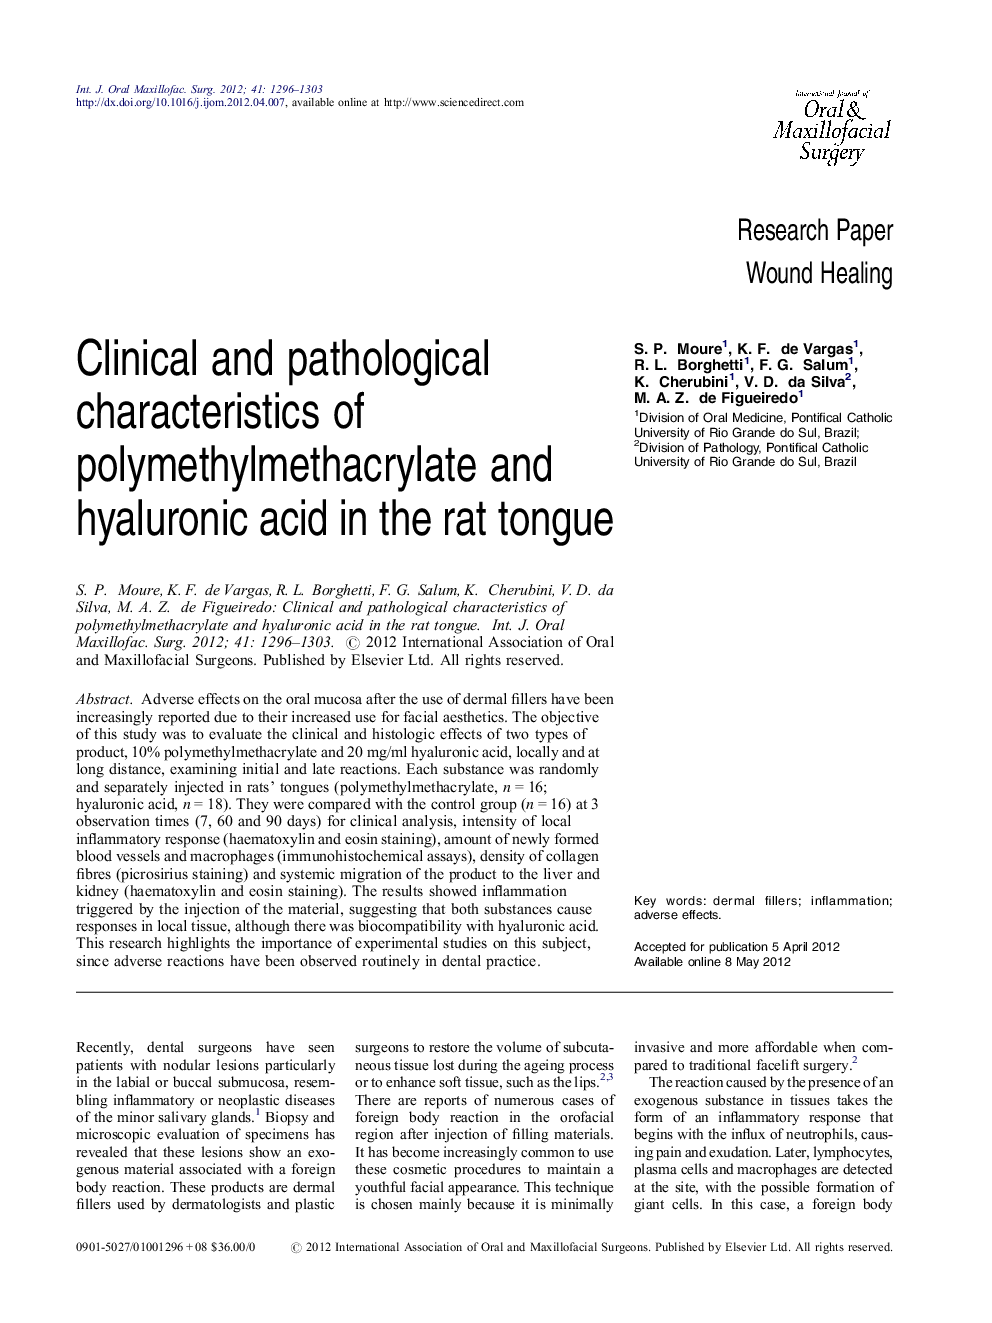 Clinical and pathological characteristics of polymethylmethacrylate and hyaluronic acid in the rat tongue